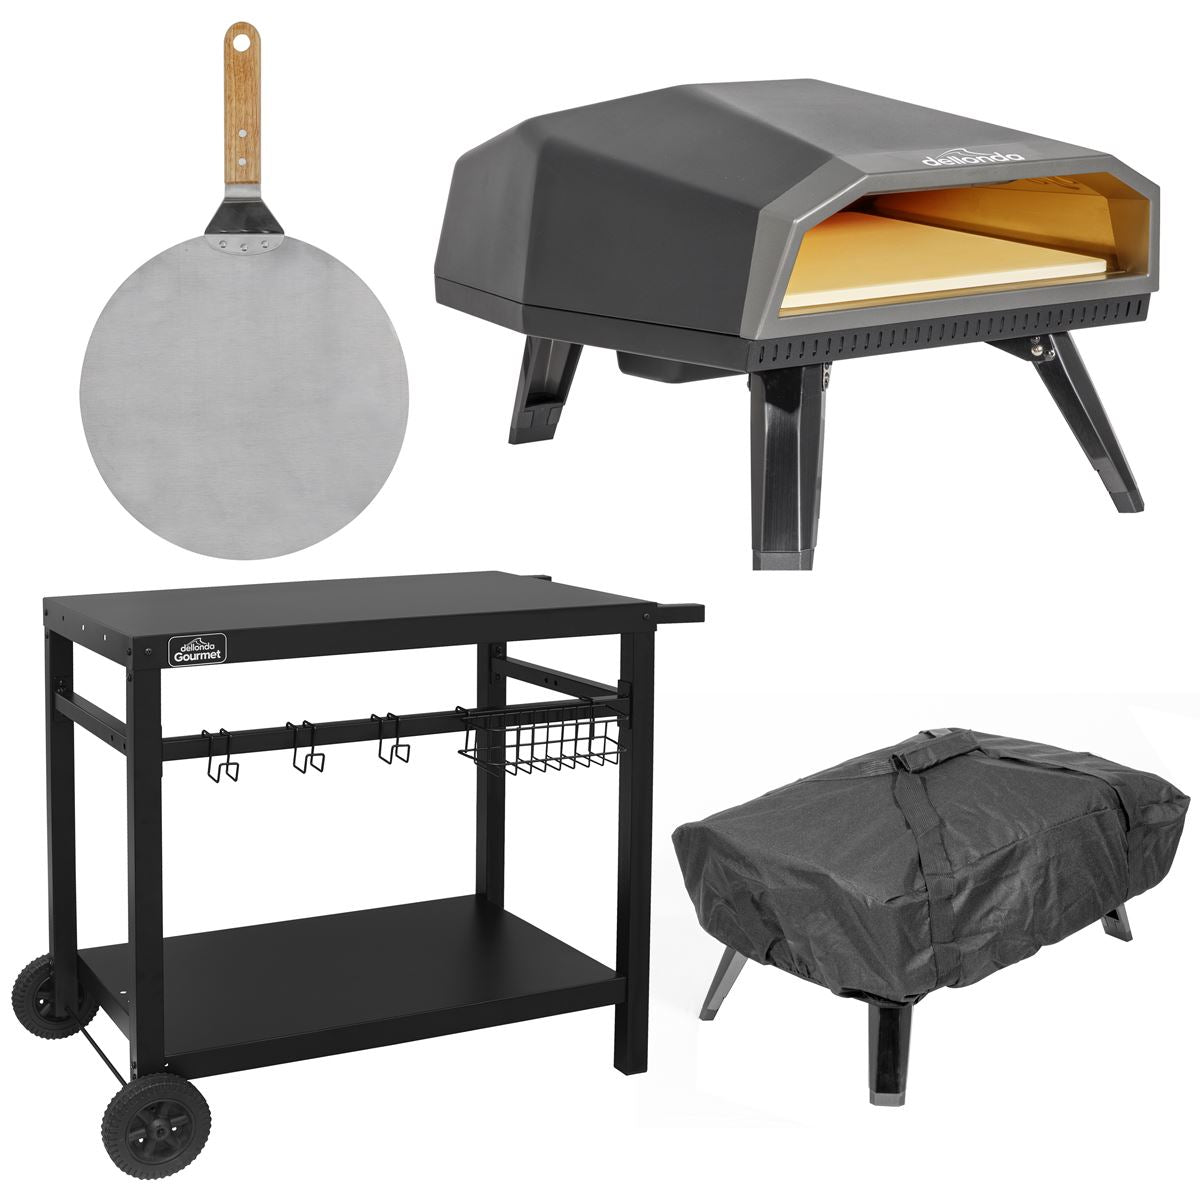 Dellonda Gas Pizza Oven with Gas Regulator, Water-Resistant Cover, 12" Pizza Peel & Plancha/BBQ Trolley